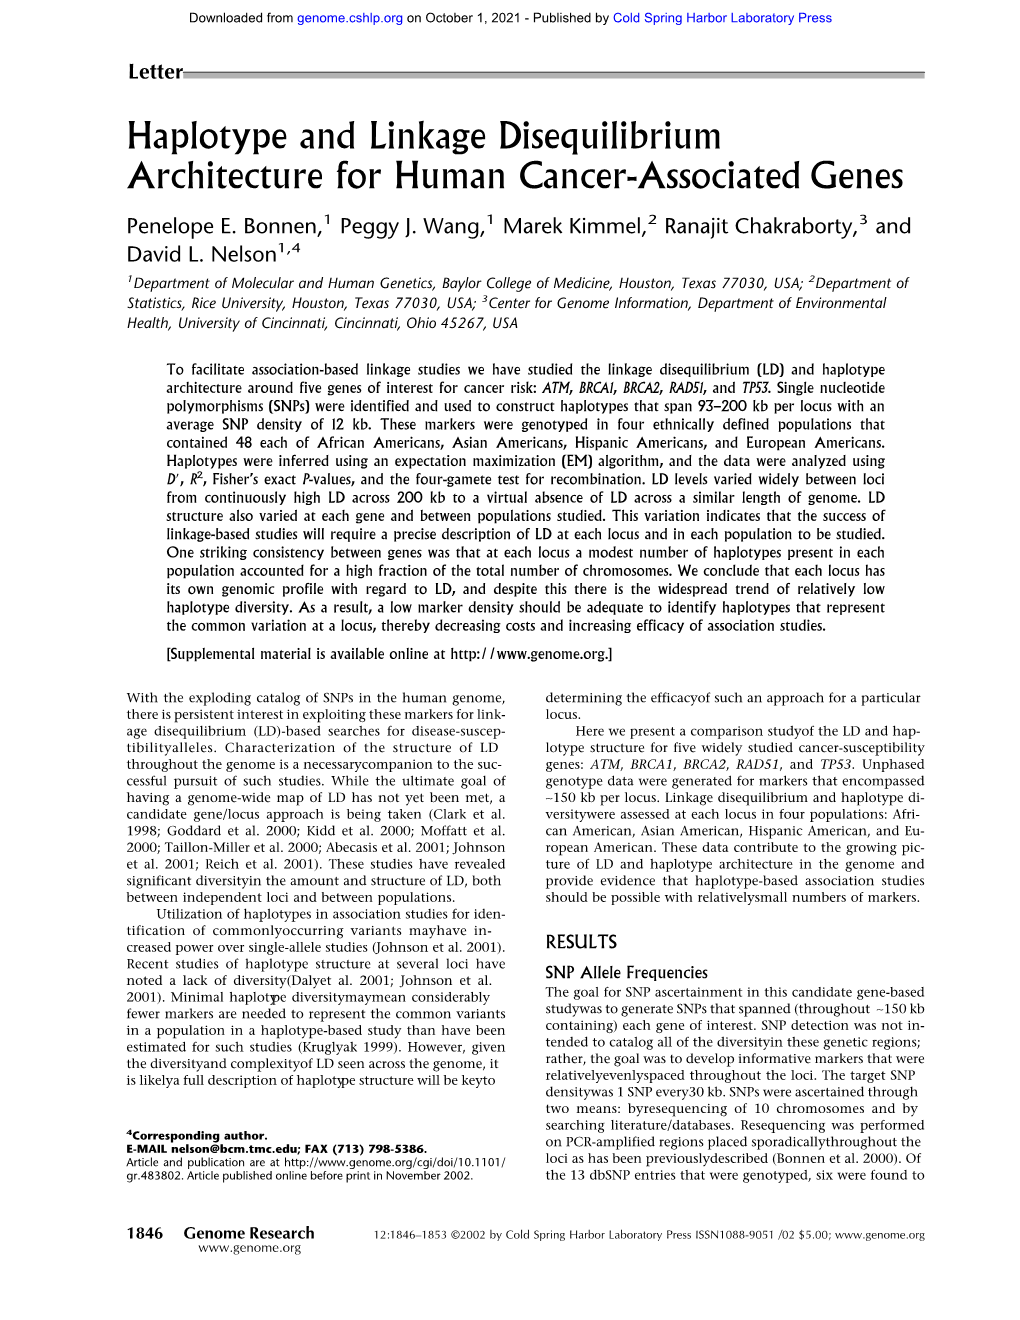 Haplotype and Linkage Disequilibrium Architecture for Human Cancer-Associated Genes